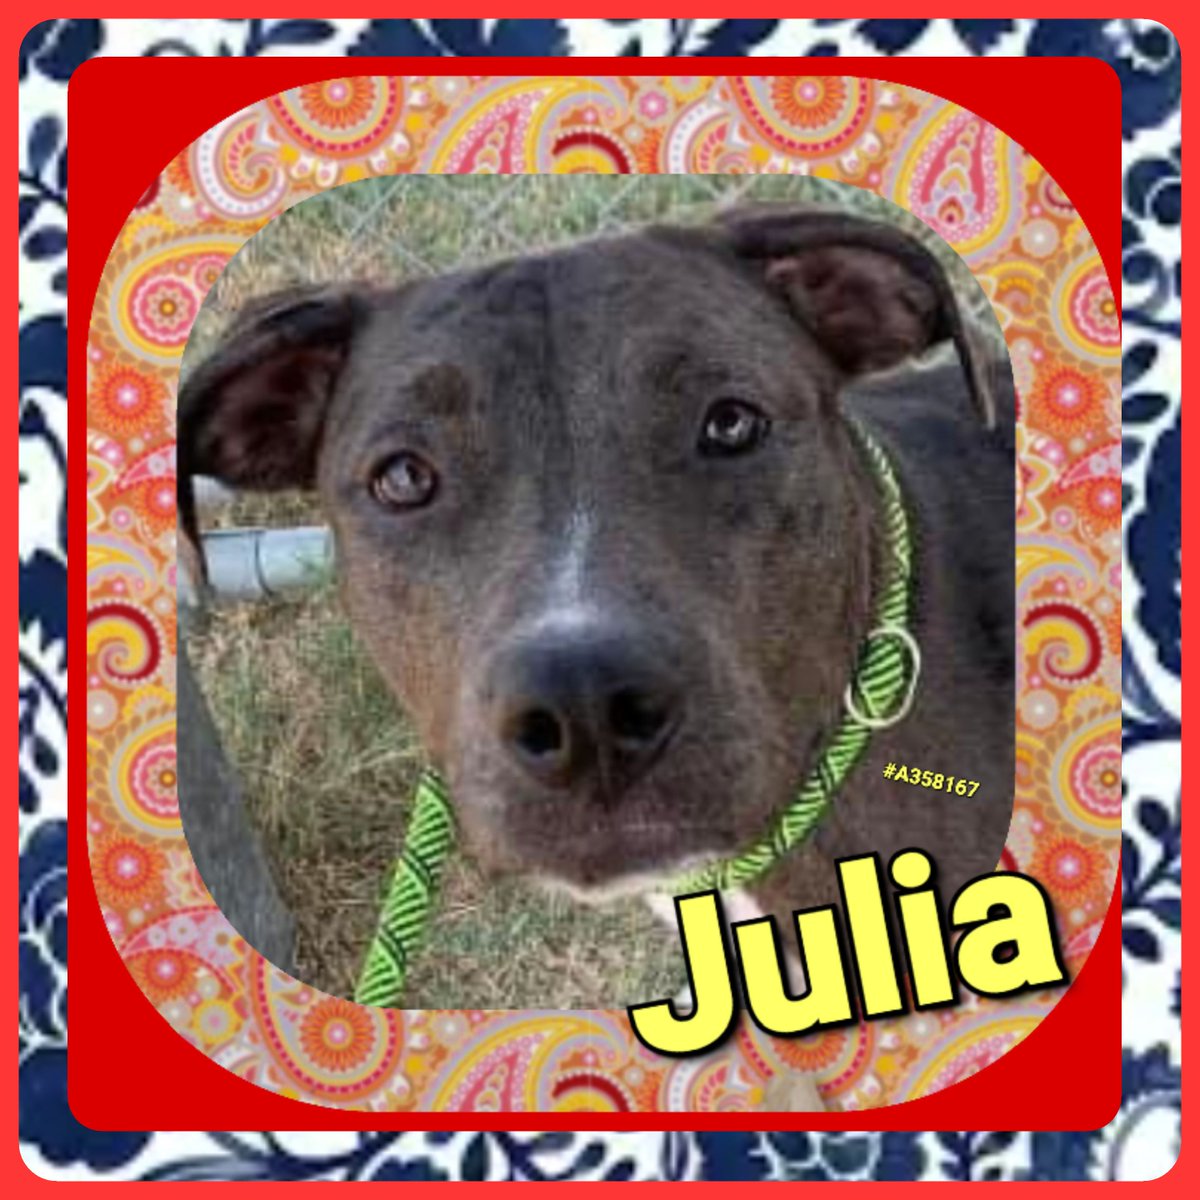 🐕⏰️🚨JULIA #A358167 🚨⏰ 🐕 At only 1yo this APBT is doomed to DIE on 8/31🔥 Why? Because she is SCARED! Look at the PAIN and sorrow in those eyes 😢🖤 We can SAVE her! Please pledge for RESQ🙏 Contact CORPUS CHRISTI ANIMAL CARE 📧 ccacsrescues@cctexas.com 📞 361-826-4630